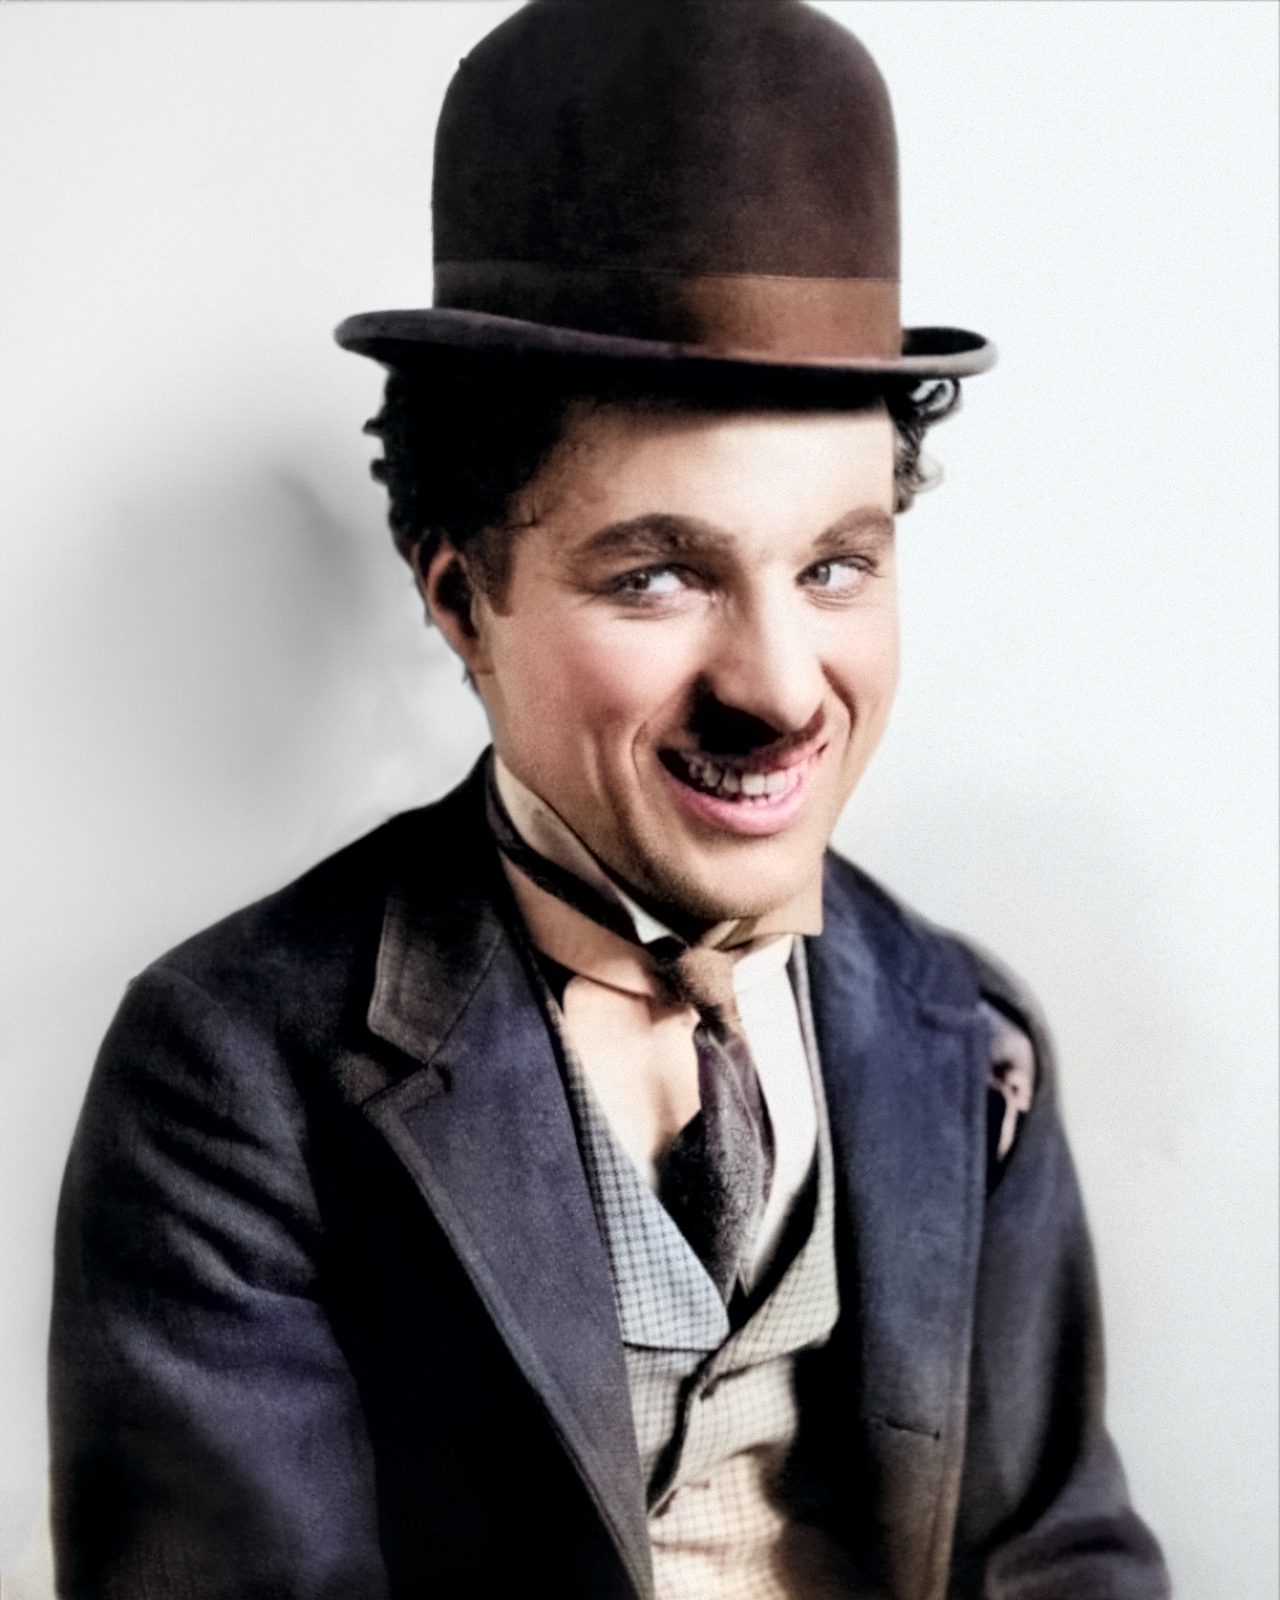 This image features Charlie Chaplin, a man wearing a black fedora hat, with a white background. He is smiling and has an air of confidence about him. His face is framed by the brim of his hat, which casts shadows on his cheeks and forehead. The man's clothing consists of a dark suit jacket over a light-colored shirt and tie, completing the look with classic style. This portrait captures Charlie Chaplin in all his iconic glory - from the signature bowler hat to the mischievous smile that made him famous around the world.